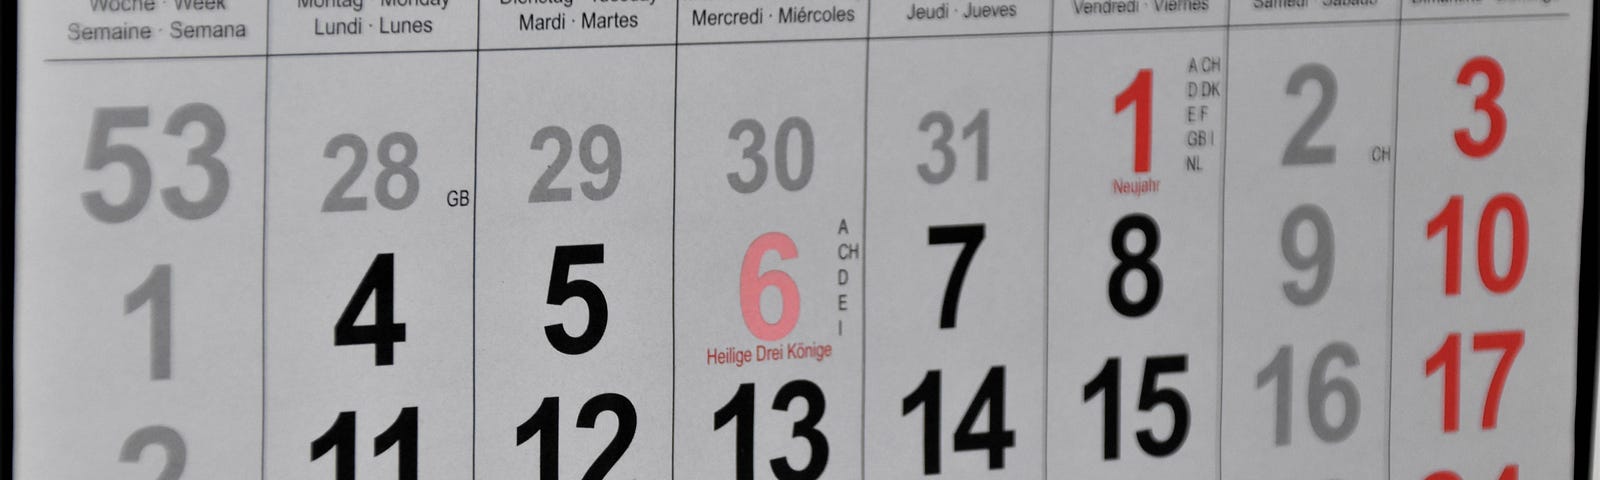 Calendar showing January with multiple languages